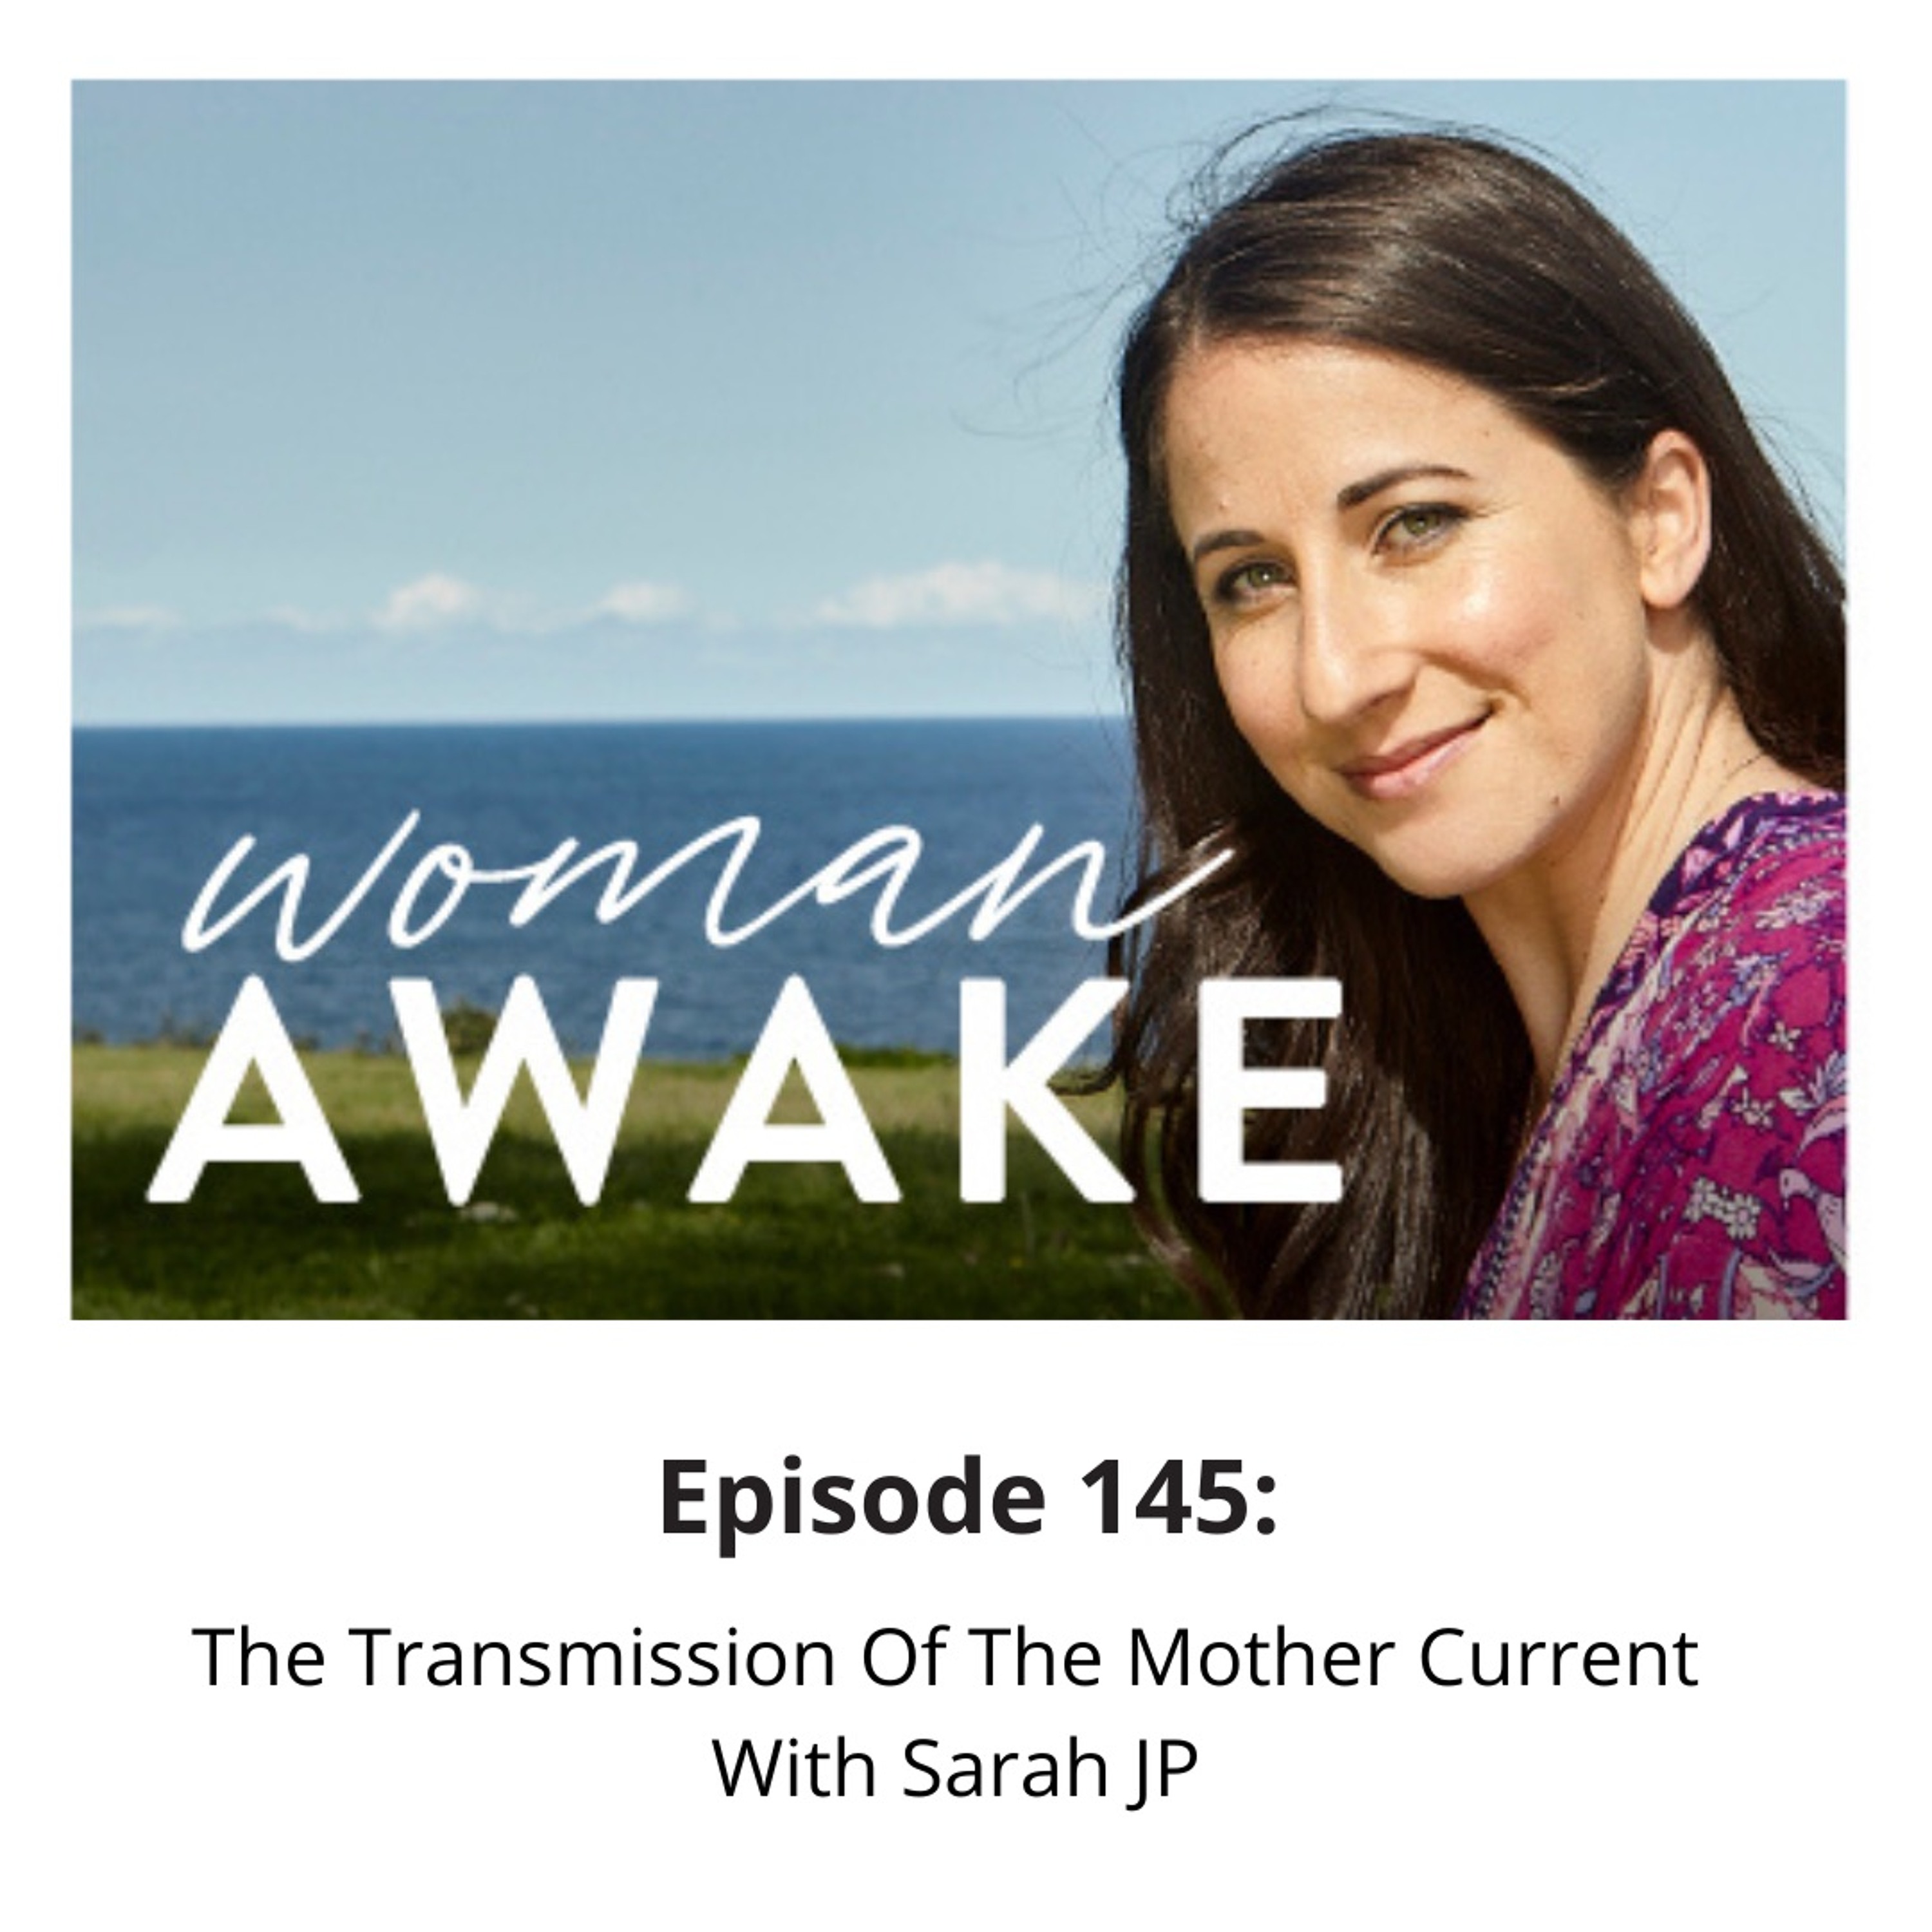 Woman Awake Episode 145 The Transmission Of The Mother Current  With Sarah JP